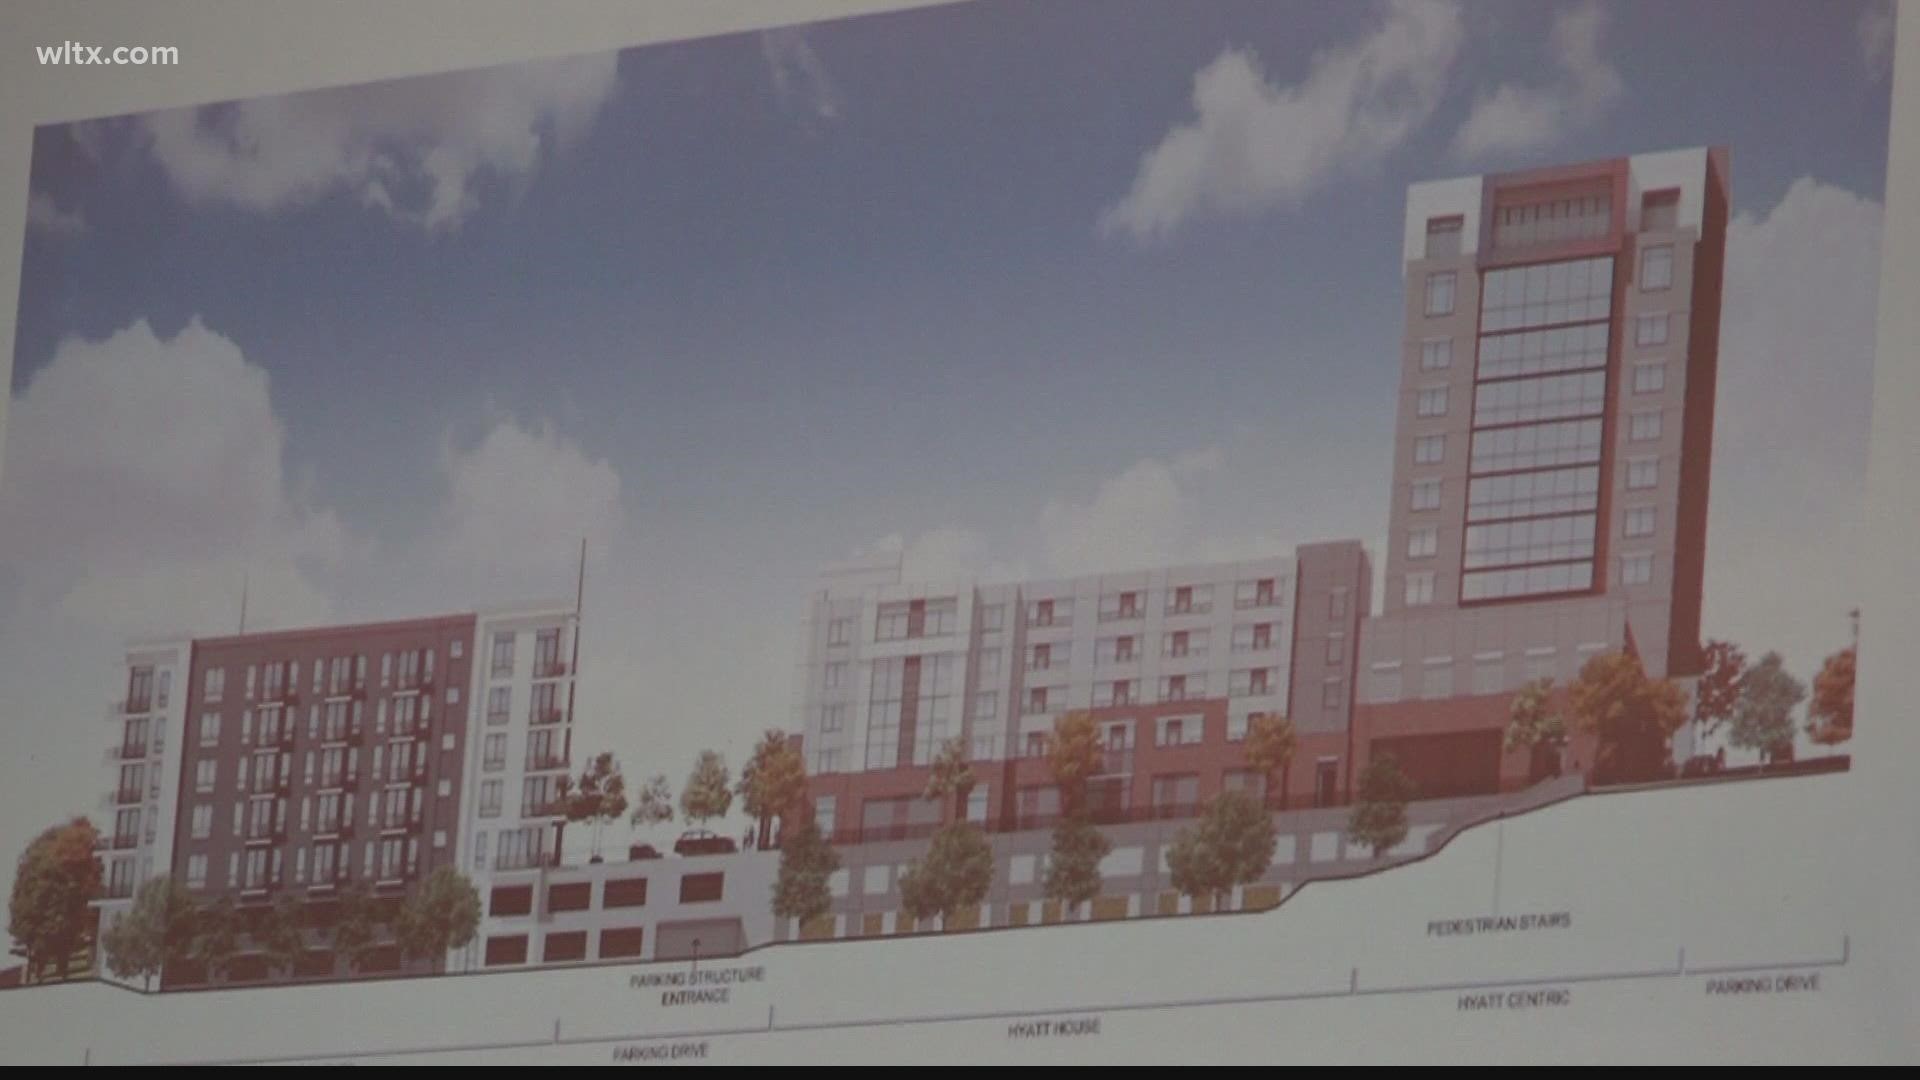 Here's what's coming and how neighbors are responding to the development plans.